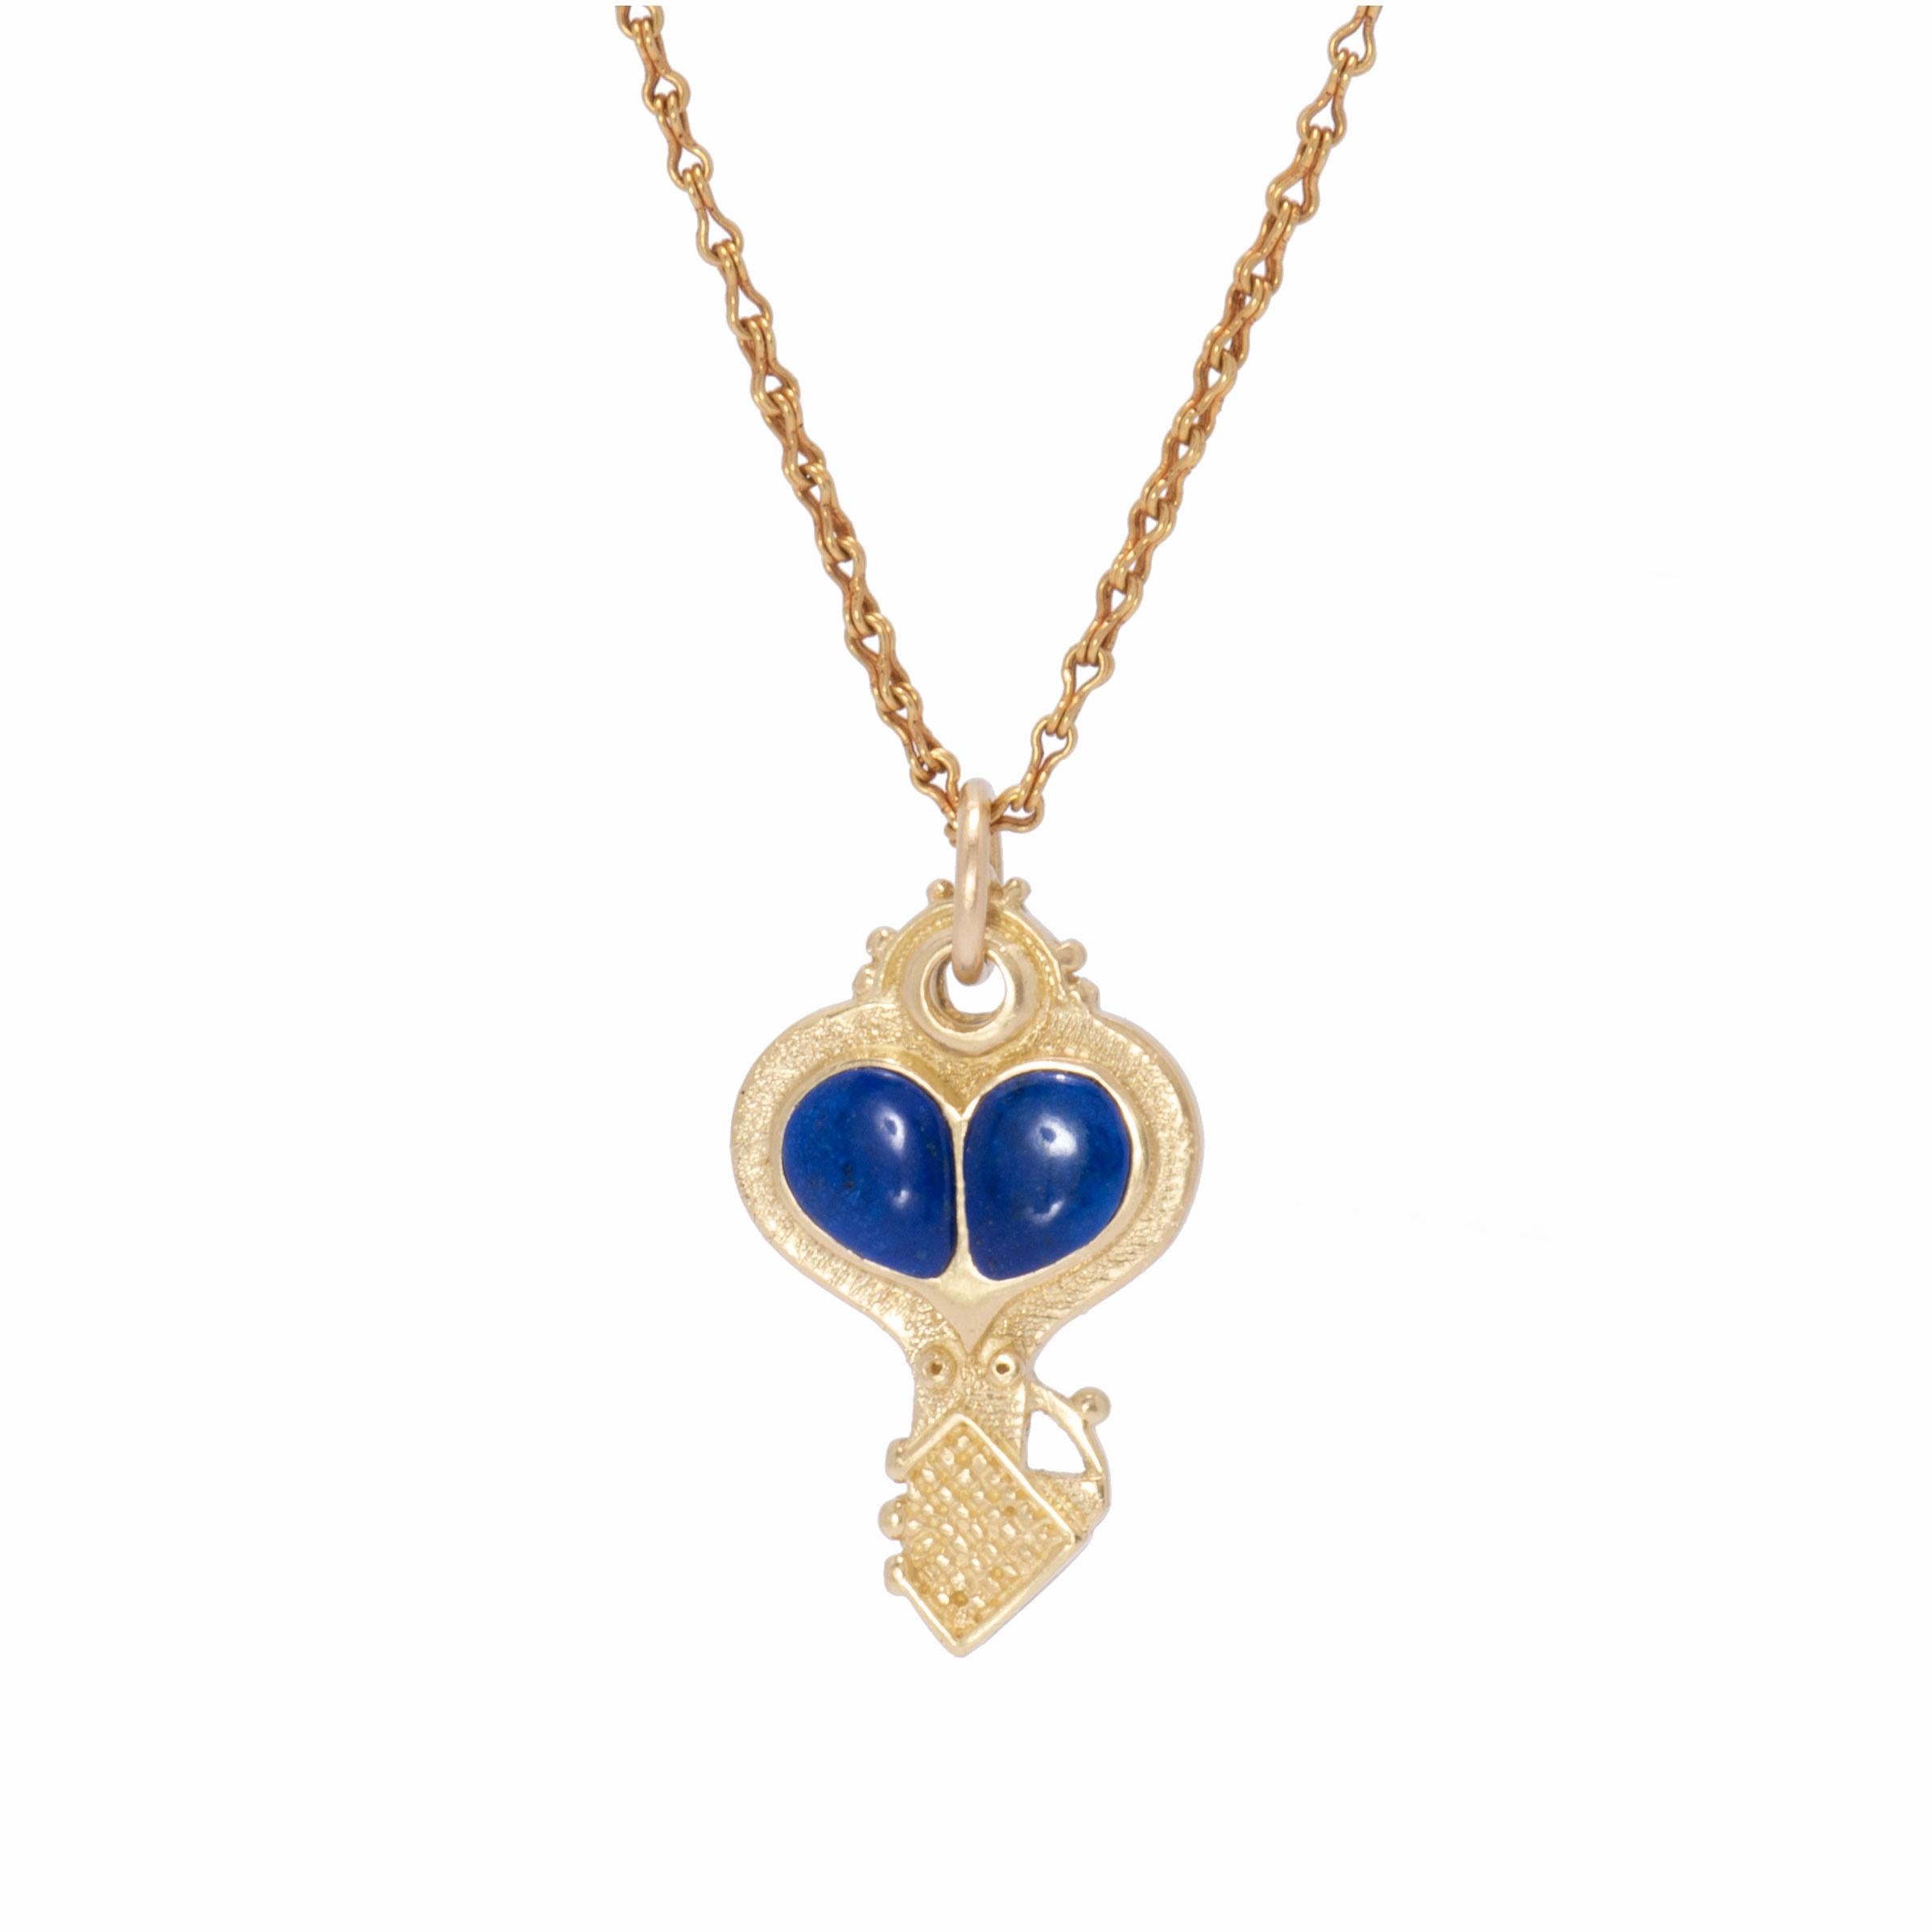 Contemporary 18 Karat Gold Key and Heart Pendant with Lapis For Sale